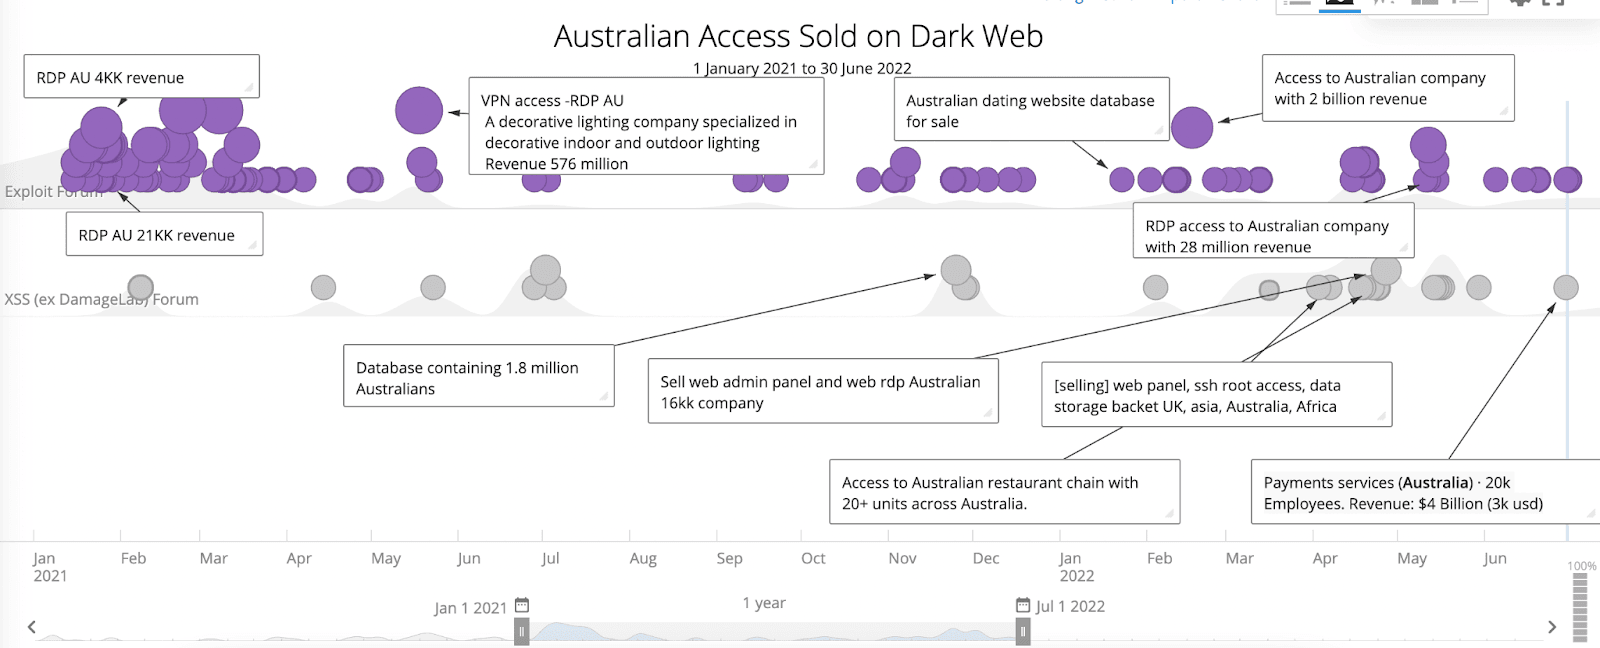 ransomware-trends-australia-2021-2022-fig-4.png